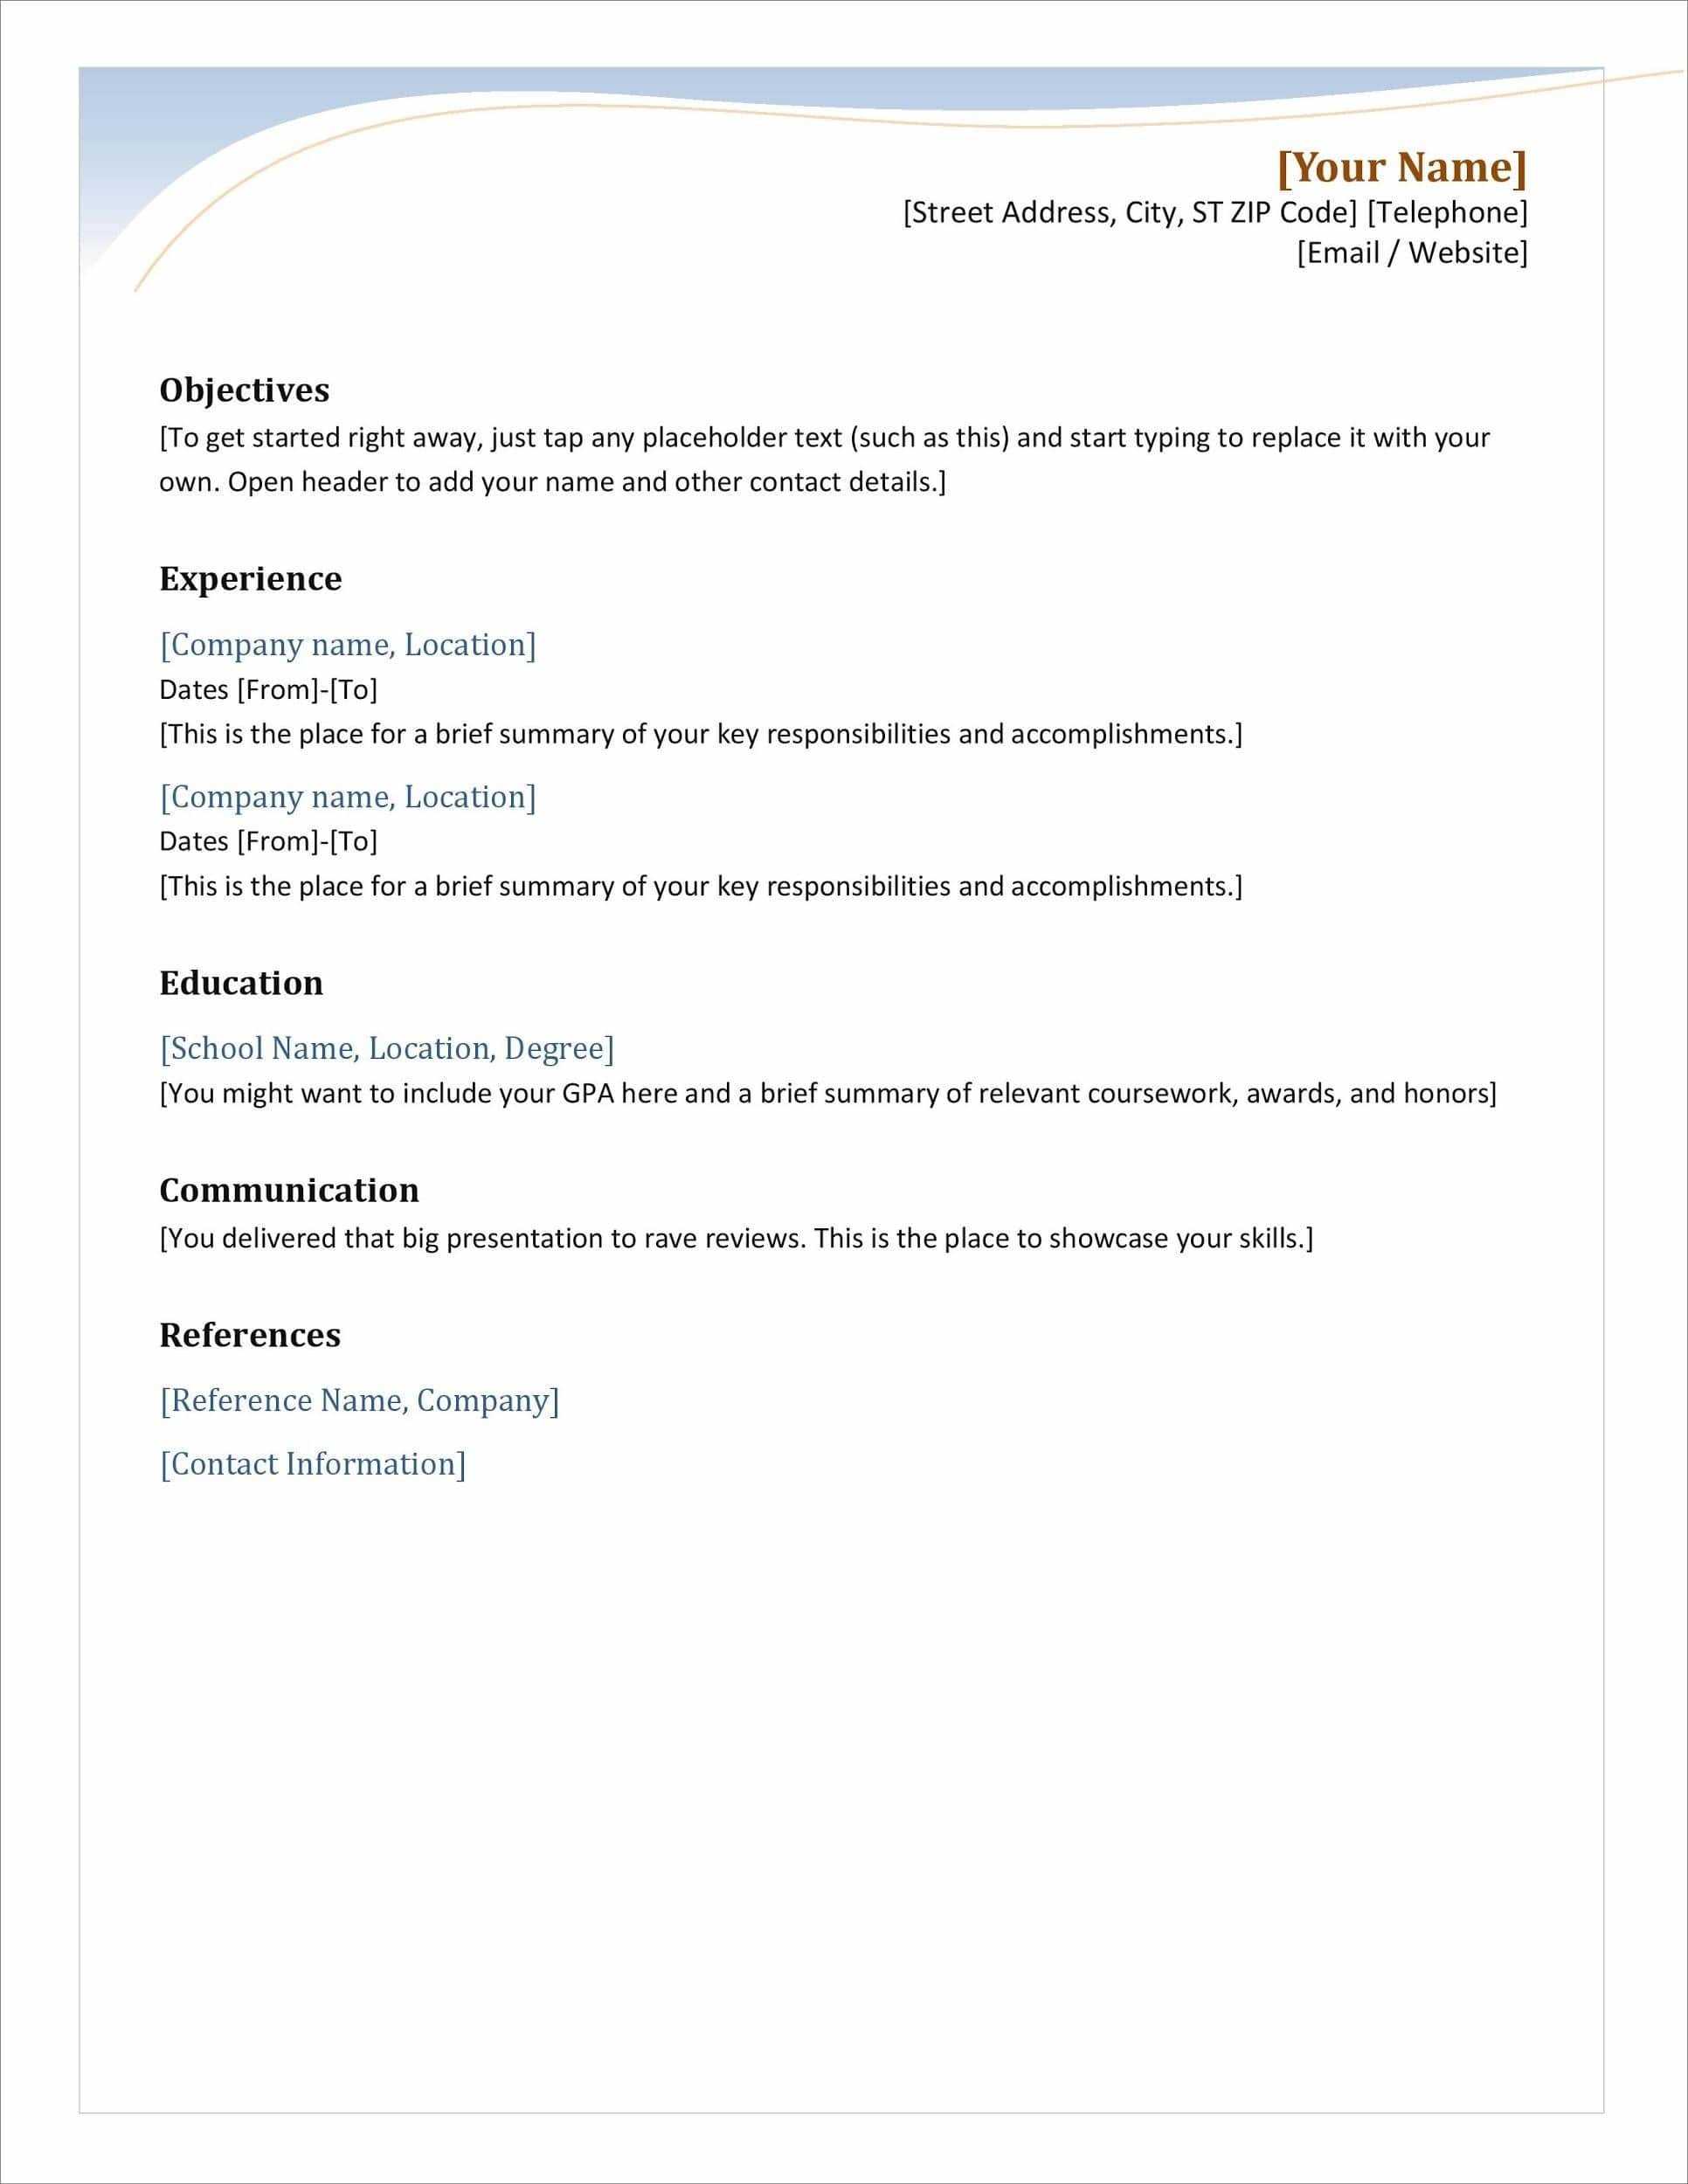 25 Resume Templates For Microsoft Word [Free Download] Throughout Simple Resume Template Microsoft Word